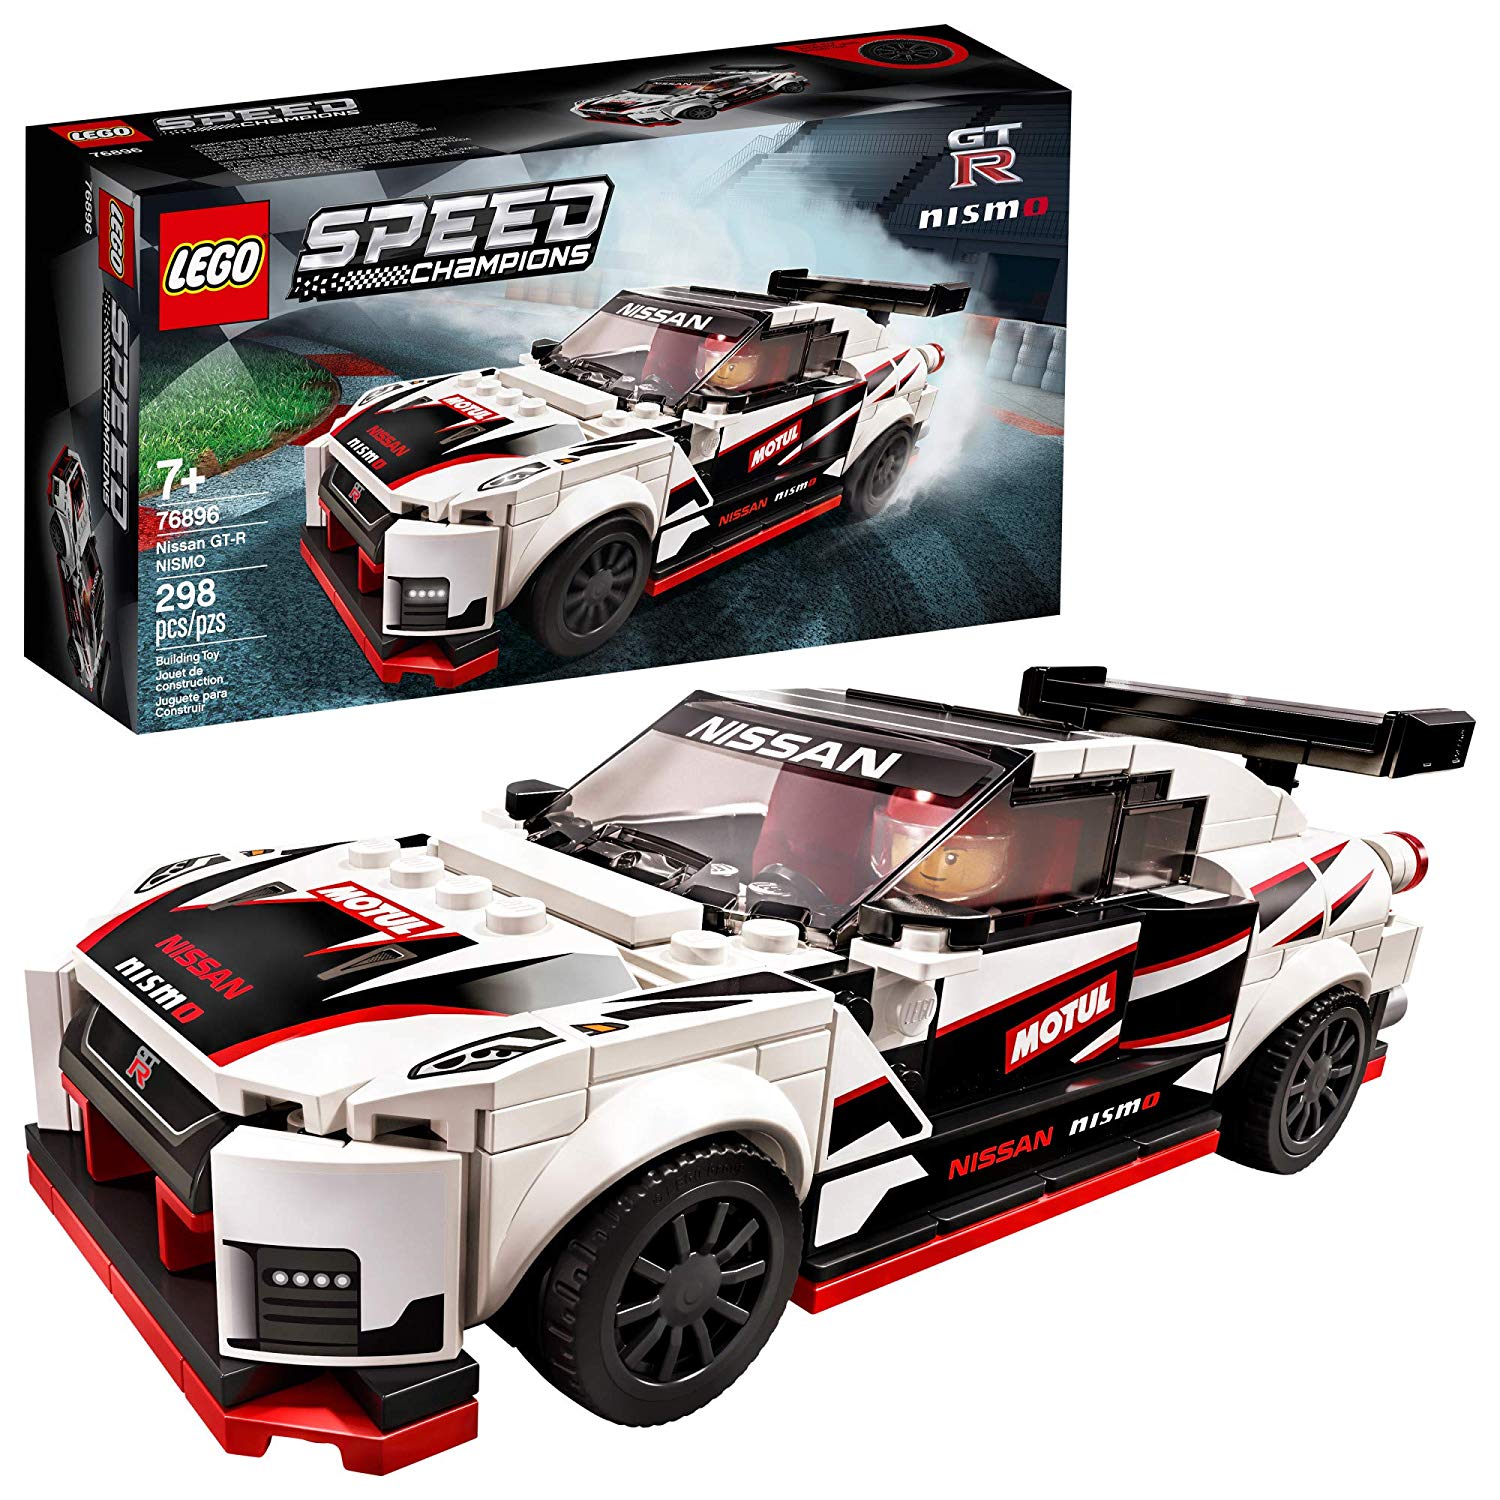 Lego 76896 Nissan GT-R NISMO Speed Champions New with Box - image 5 of 5